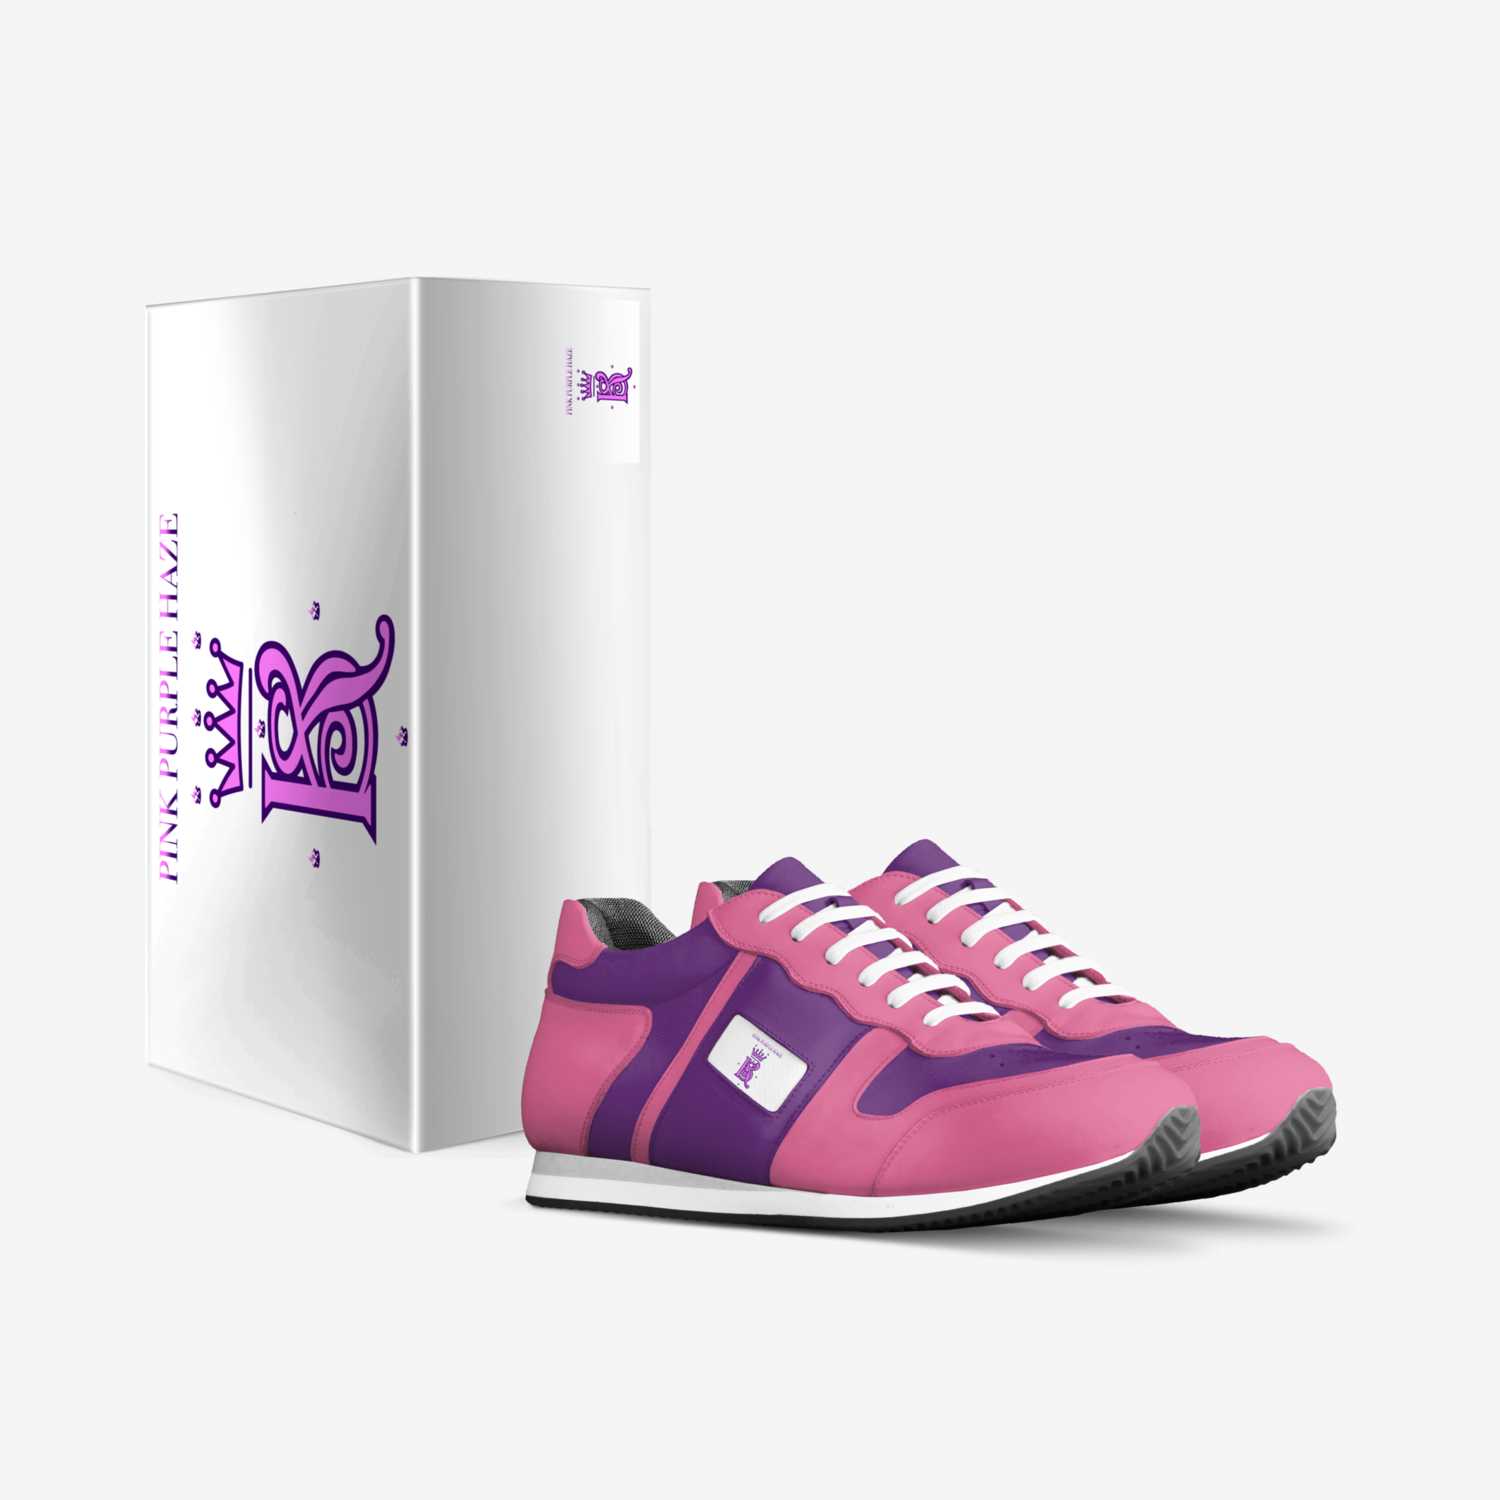 PINK PURPLE HAZE custom made in Italy shoes by T.michelle Roberts | Box view